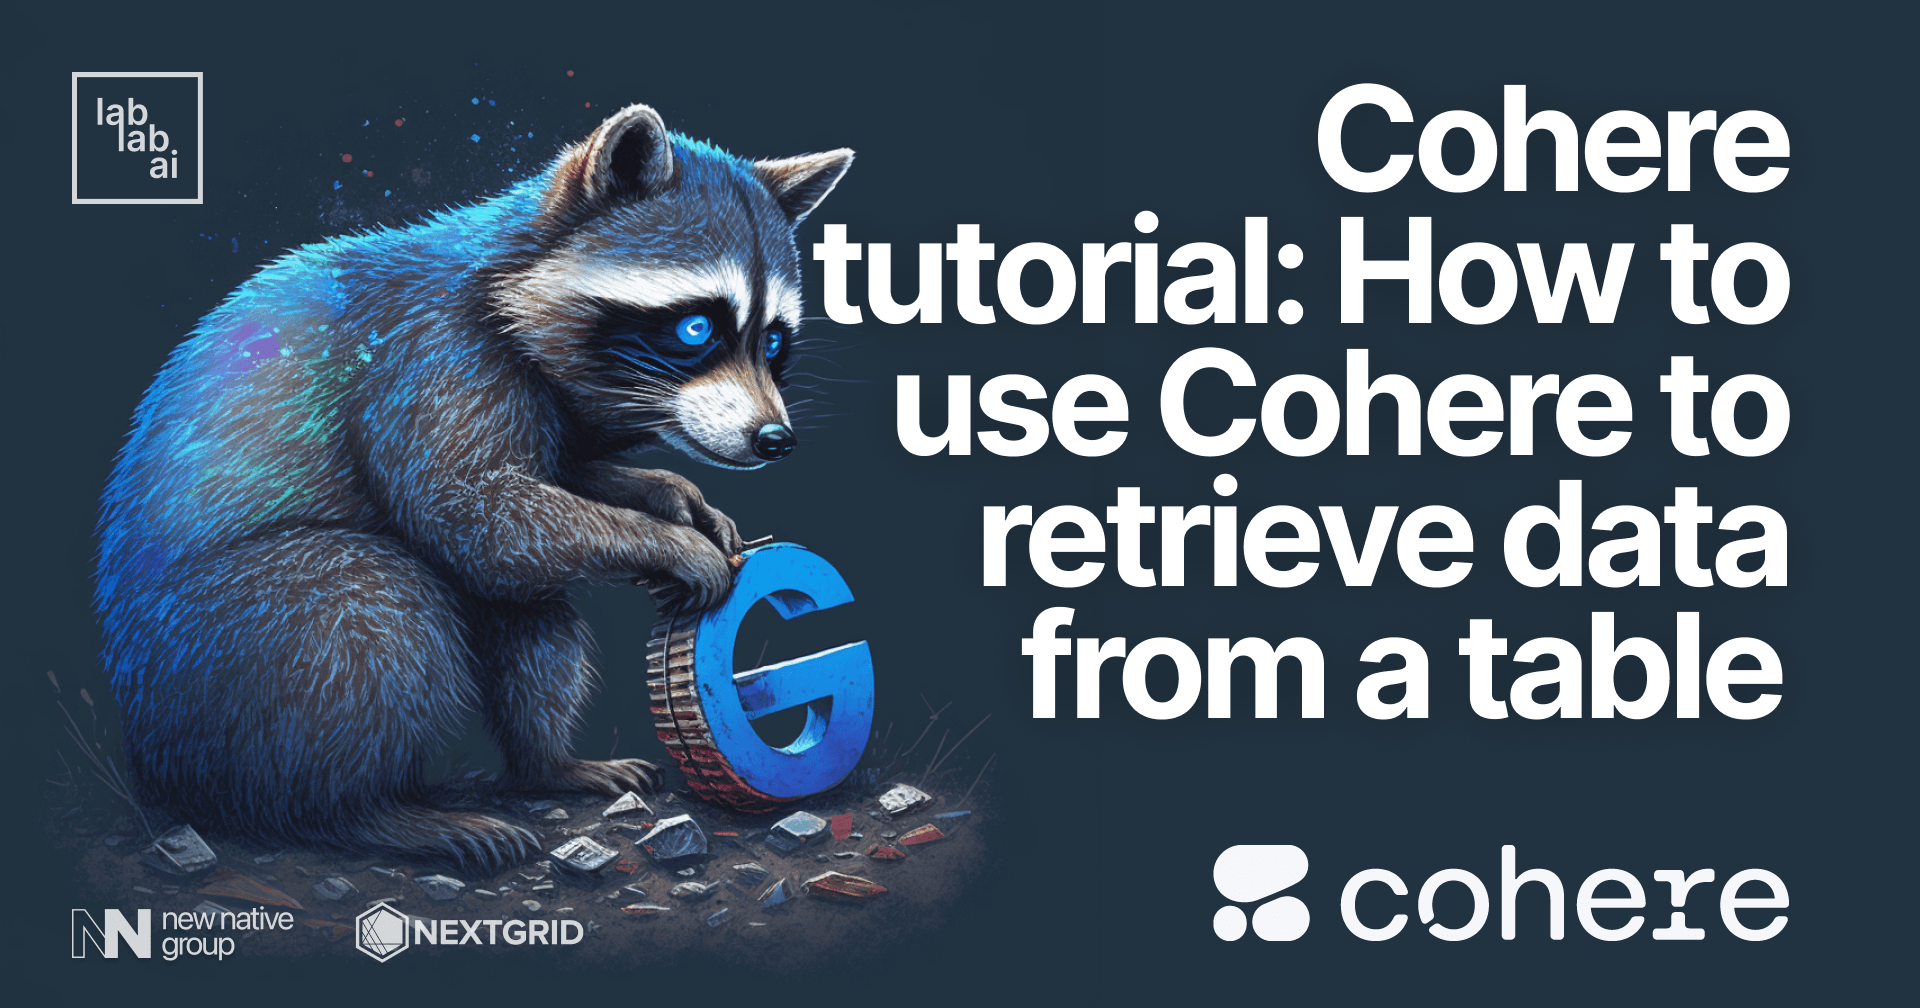 Cohere tutorial: Answering questions based on given data